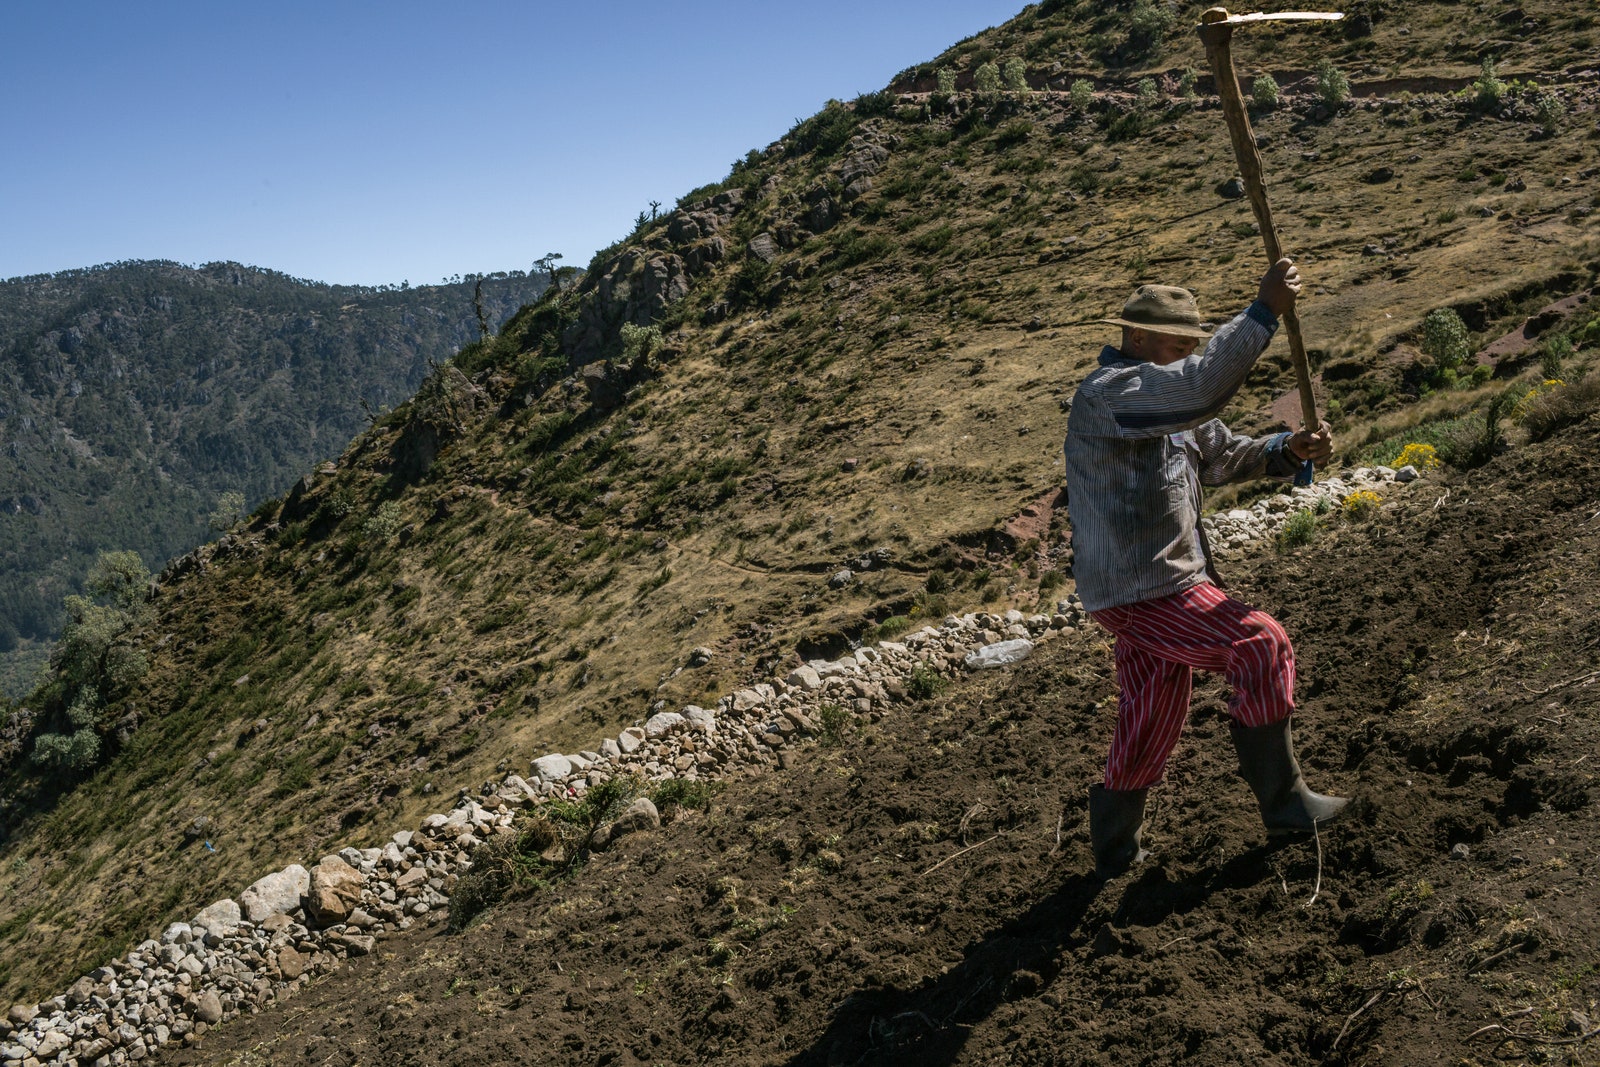 A worker prepares the land for the next harvest.